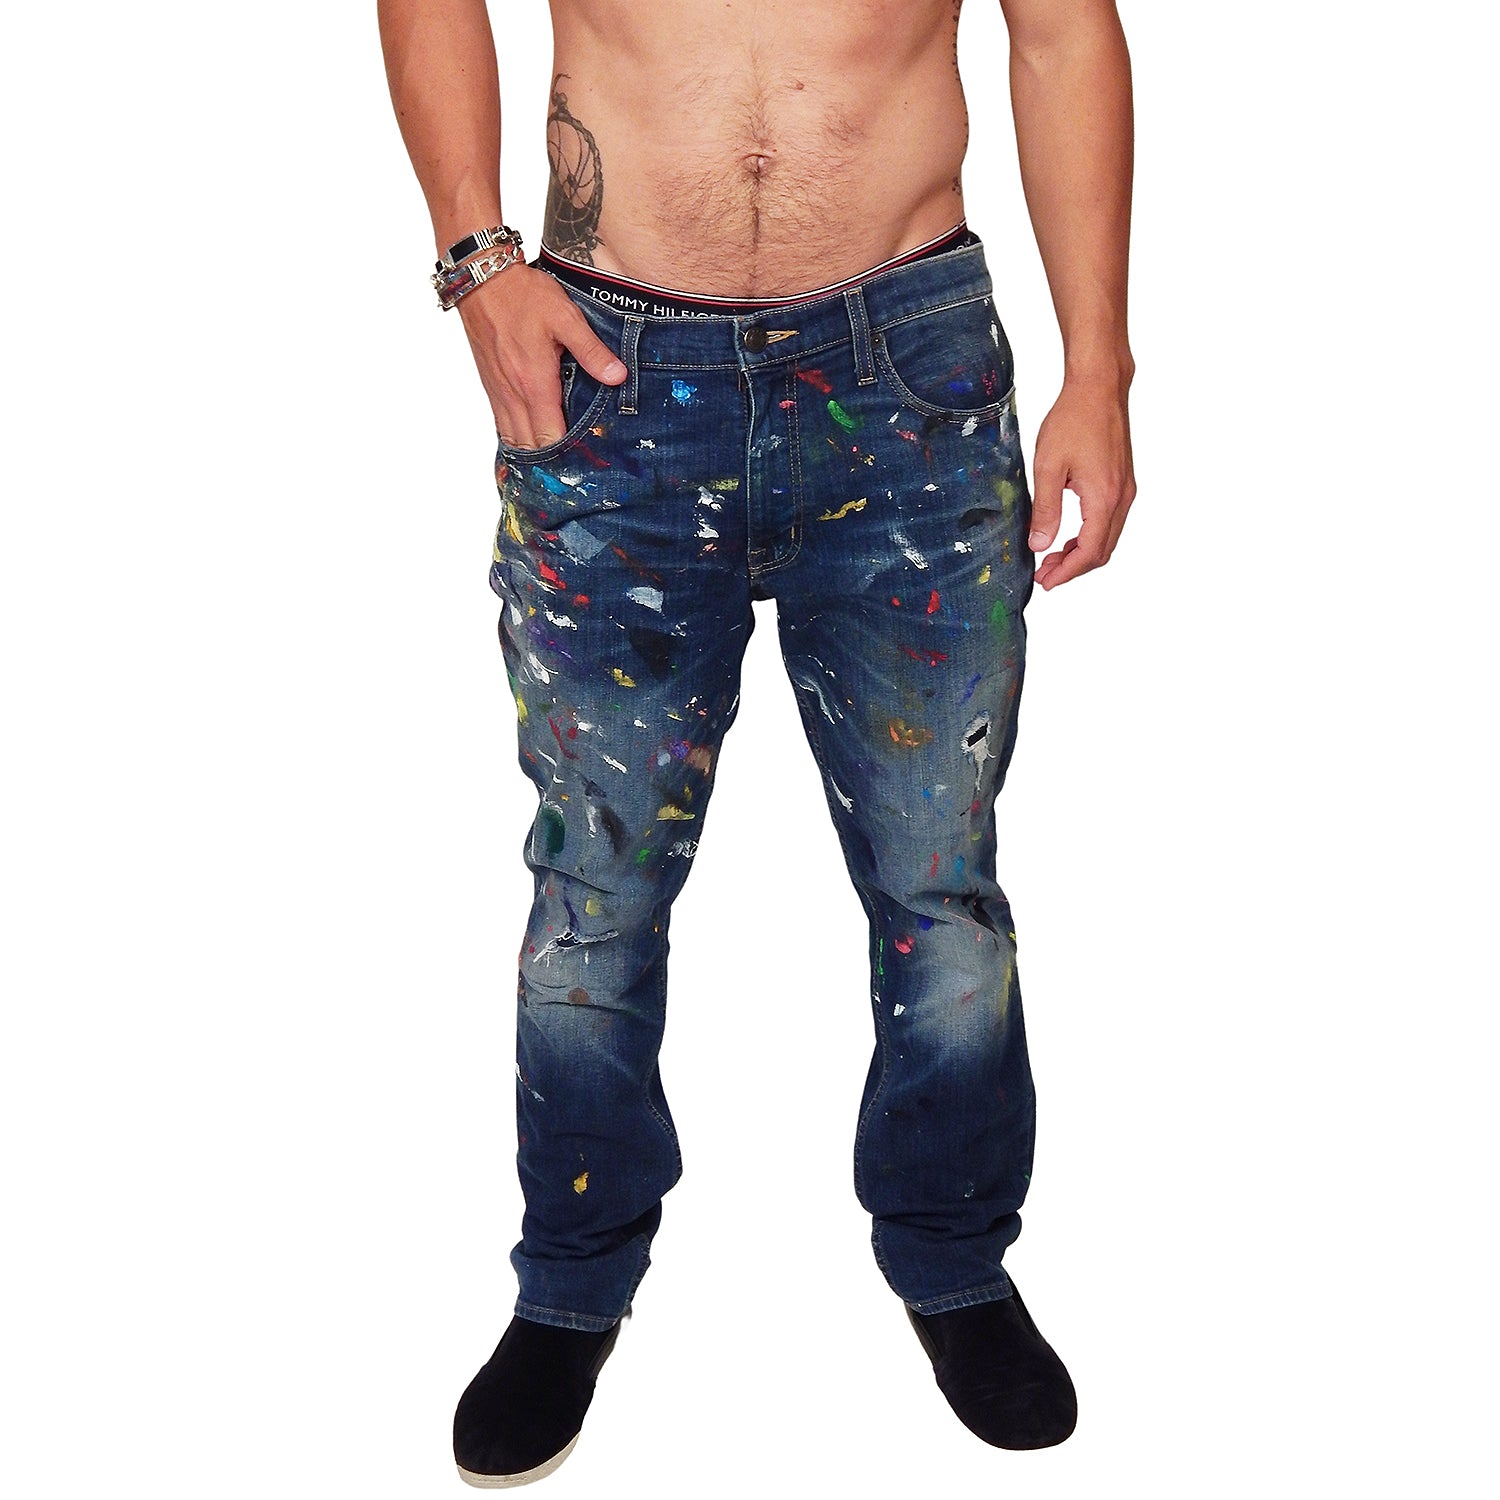 DAMIAN ELWES - &quot;Number 41&quot; - Hand Painted Jeans by Damian Elwes